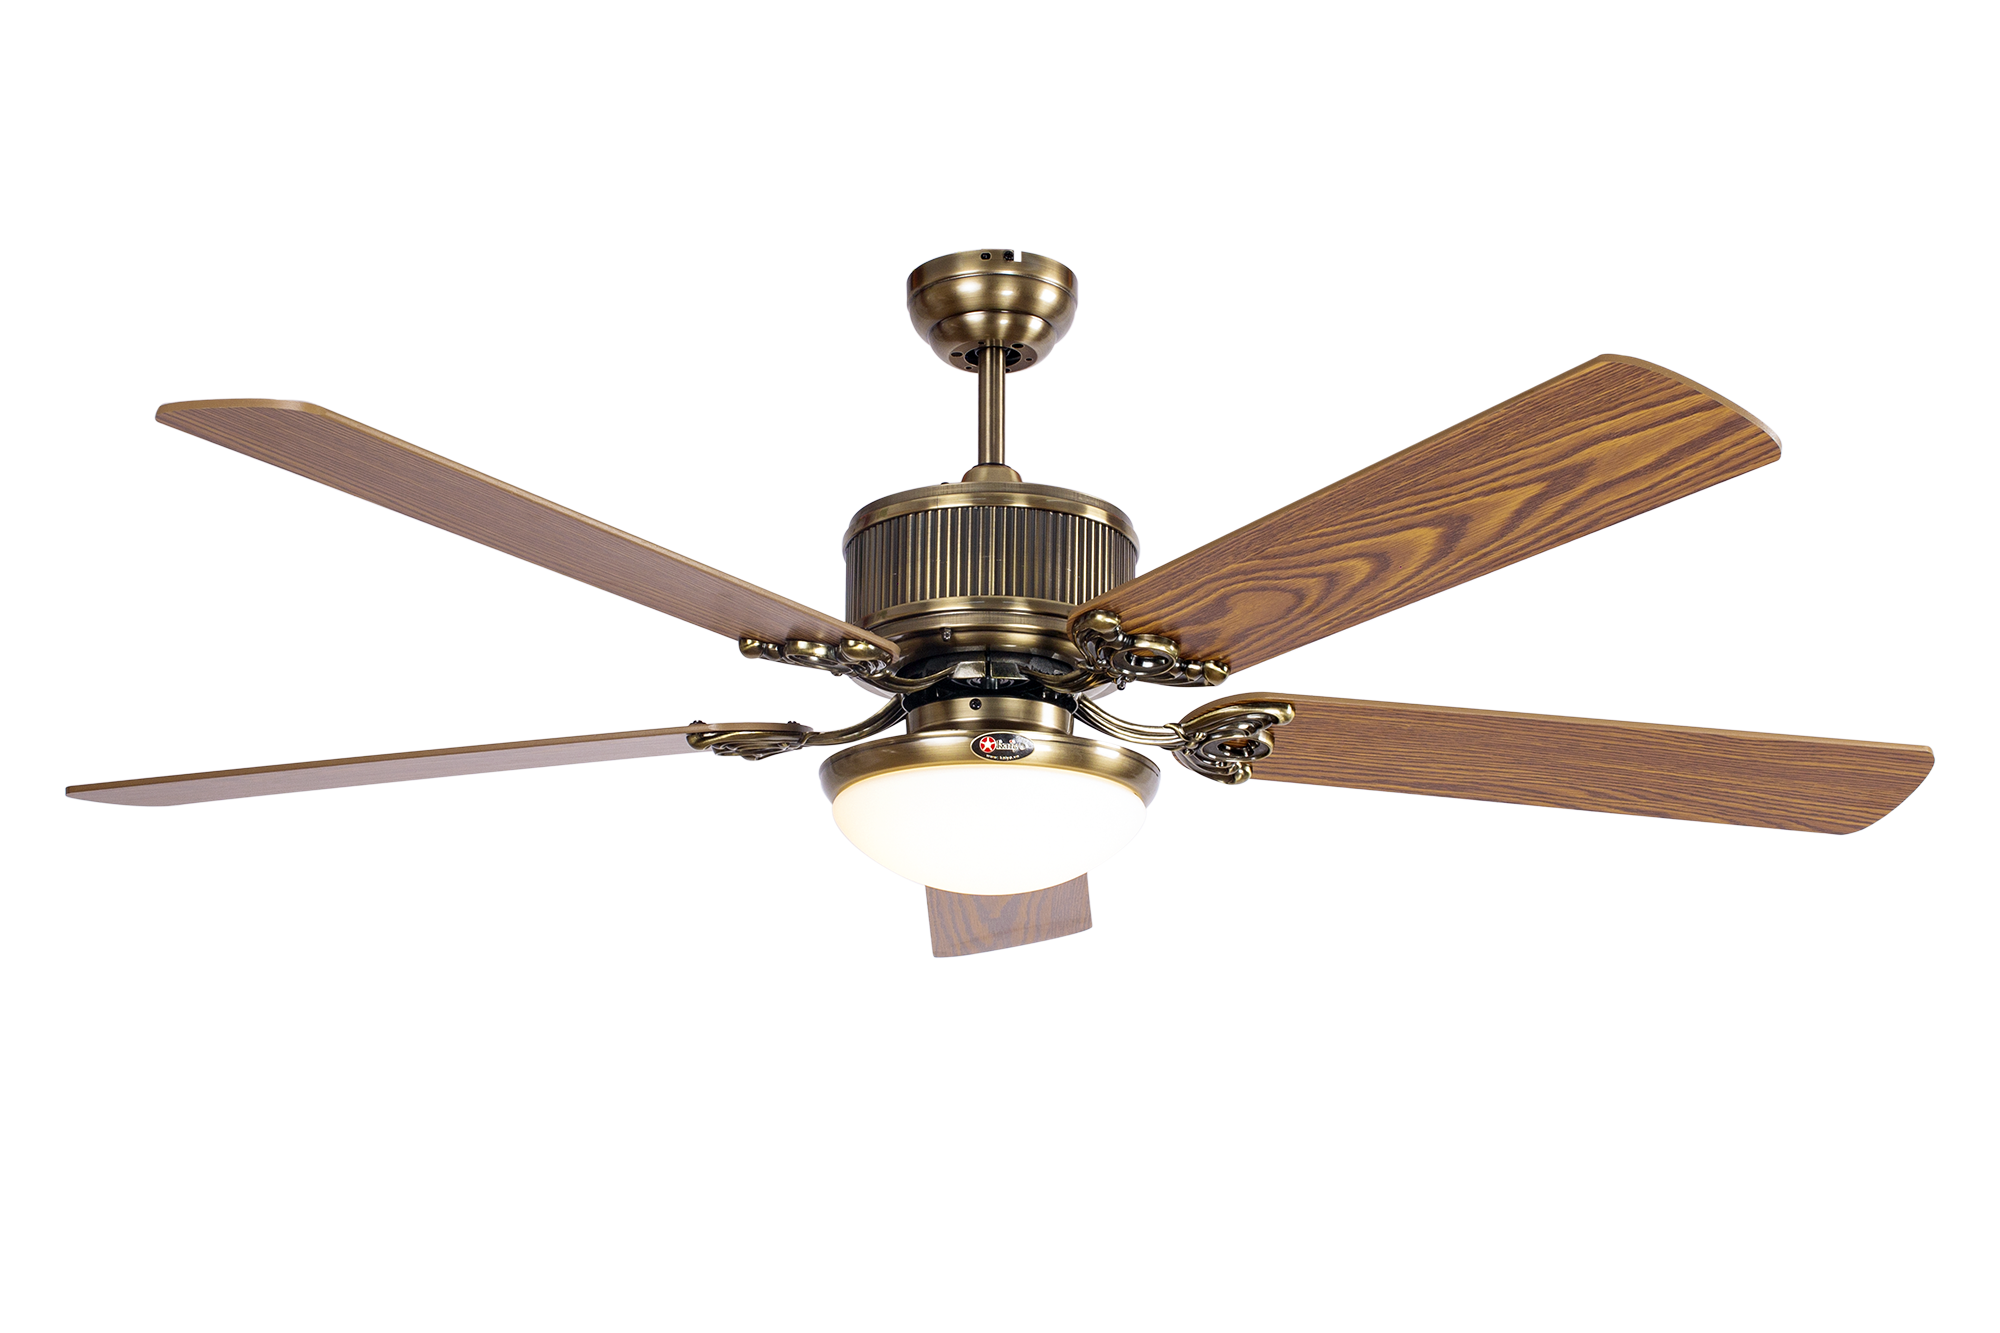 Classic style ceiling fans